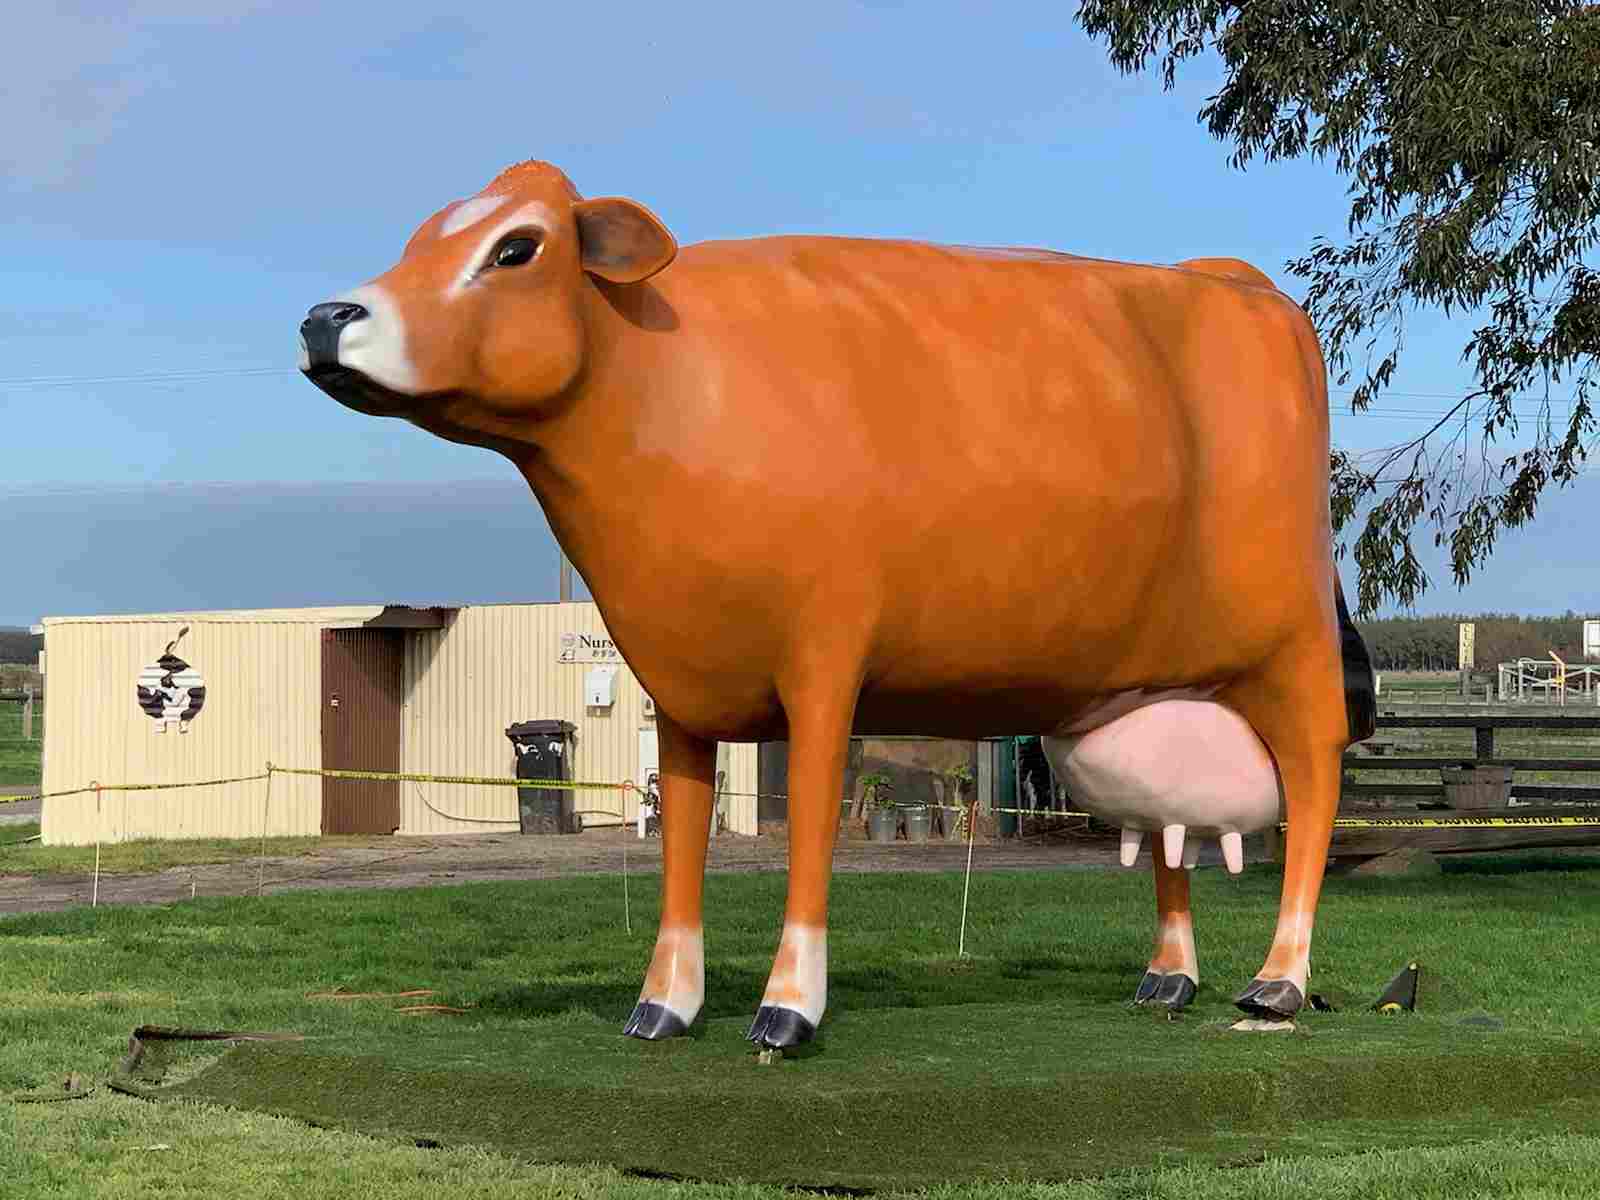 Giant Fibreglass Cow - Tourist Attraction - Business Opportunity